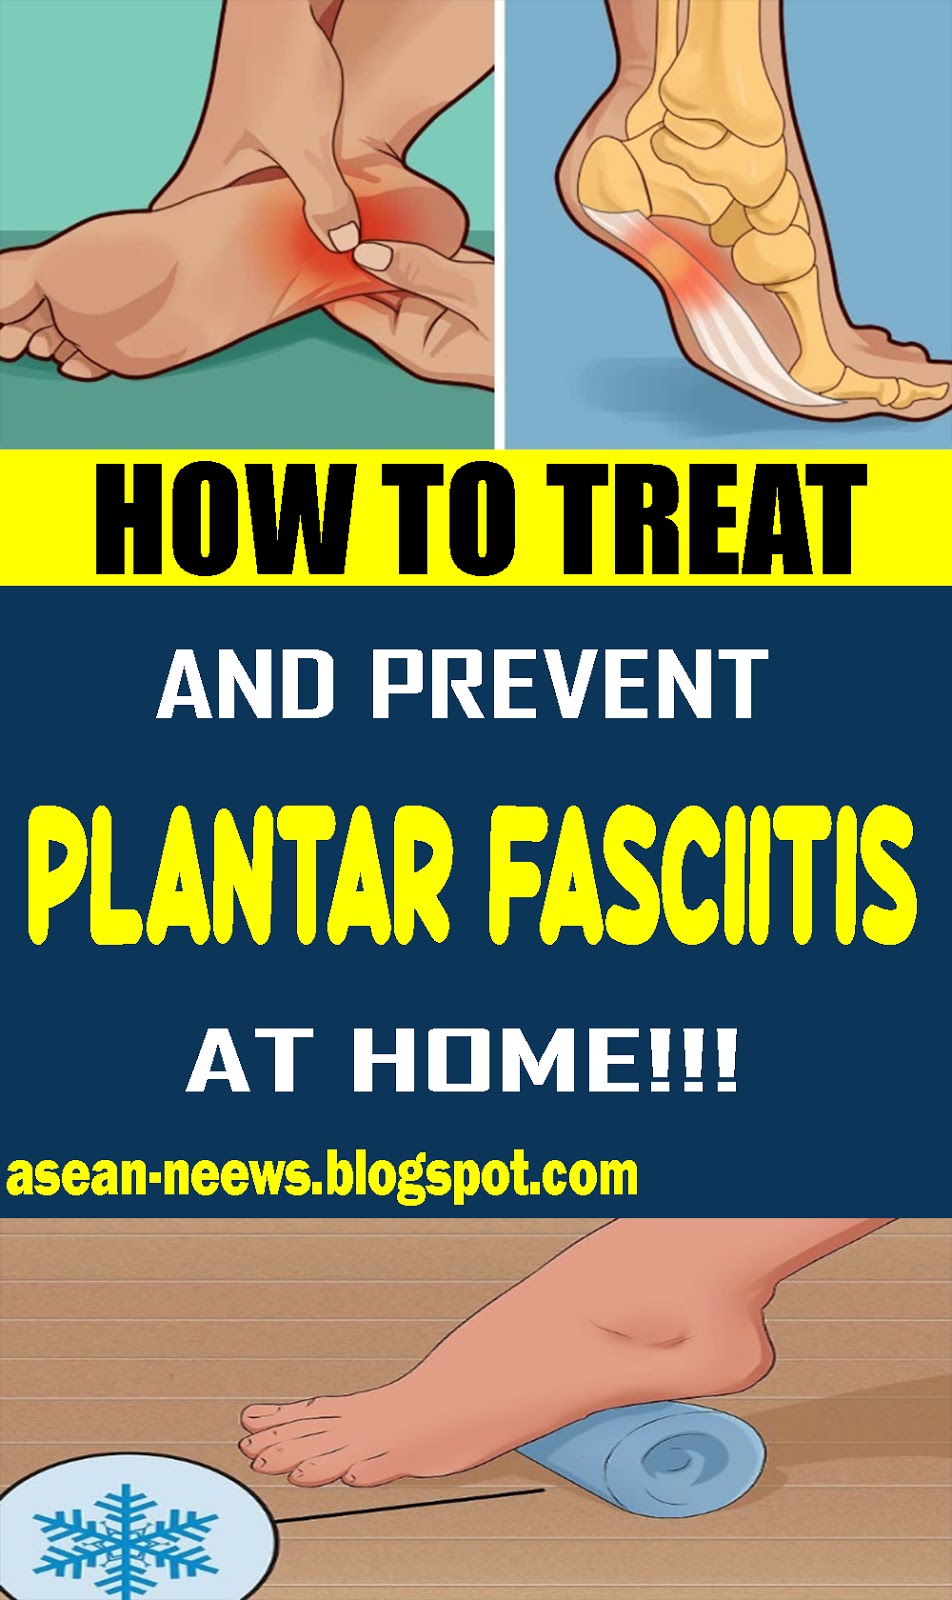 How To Treat And Prevent Plantar Fasciitis at Home